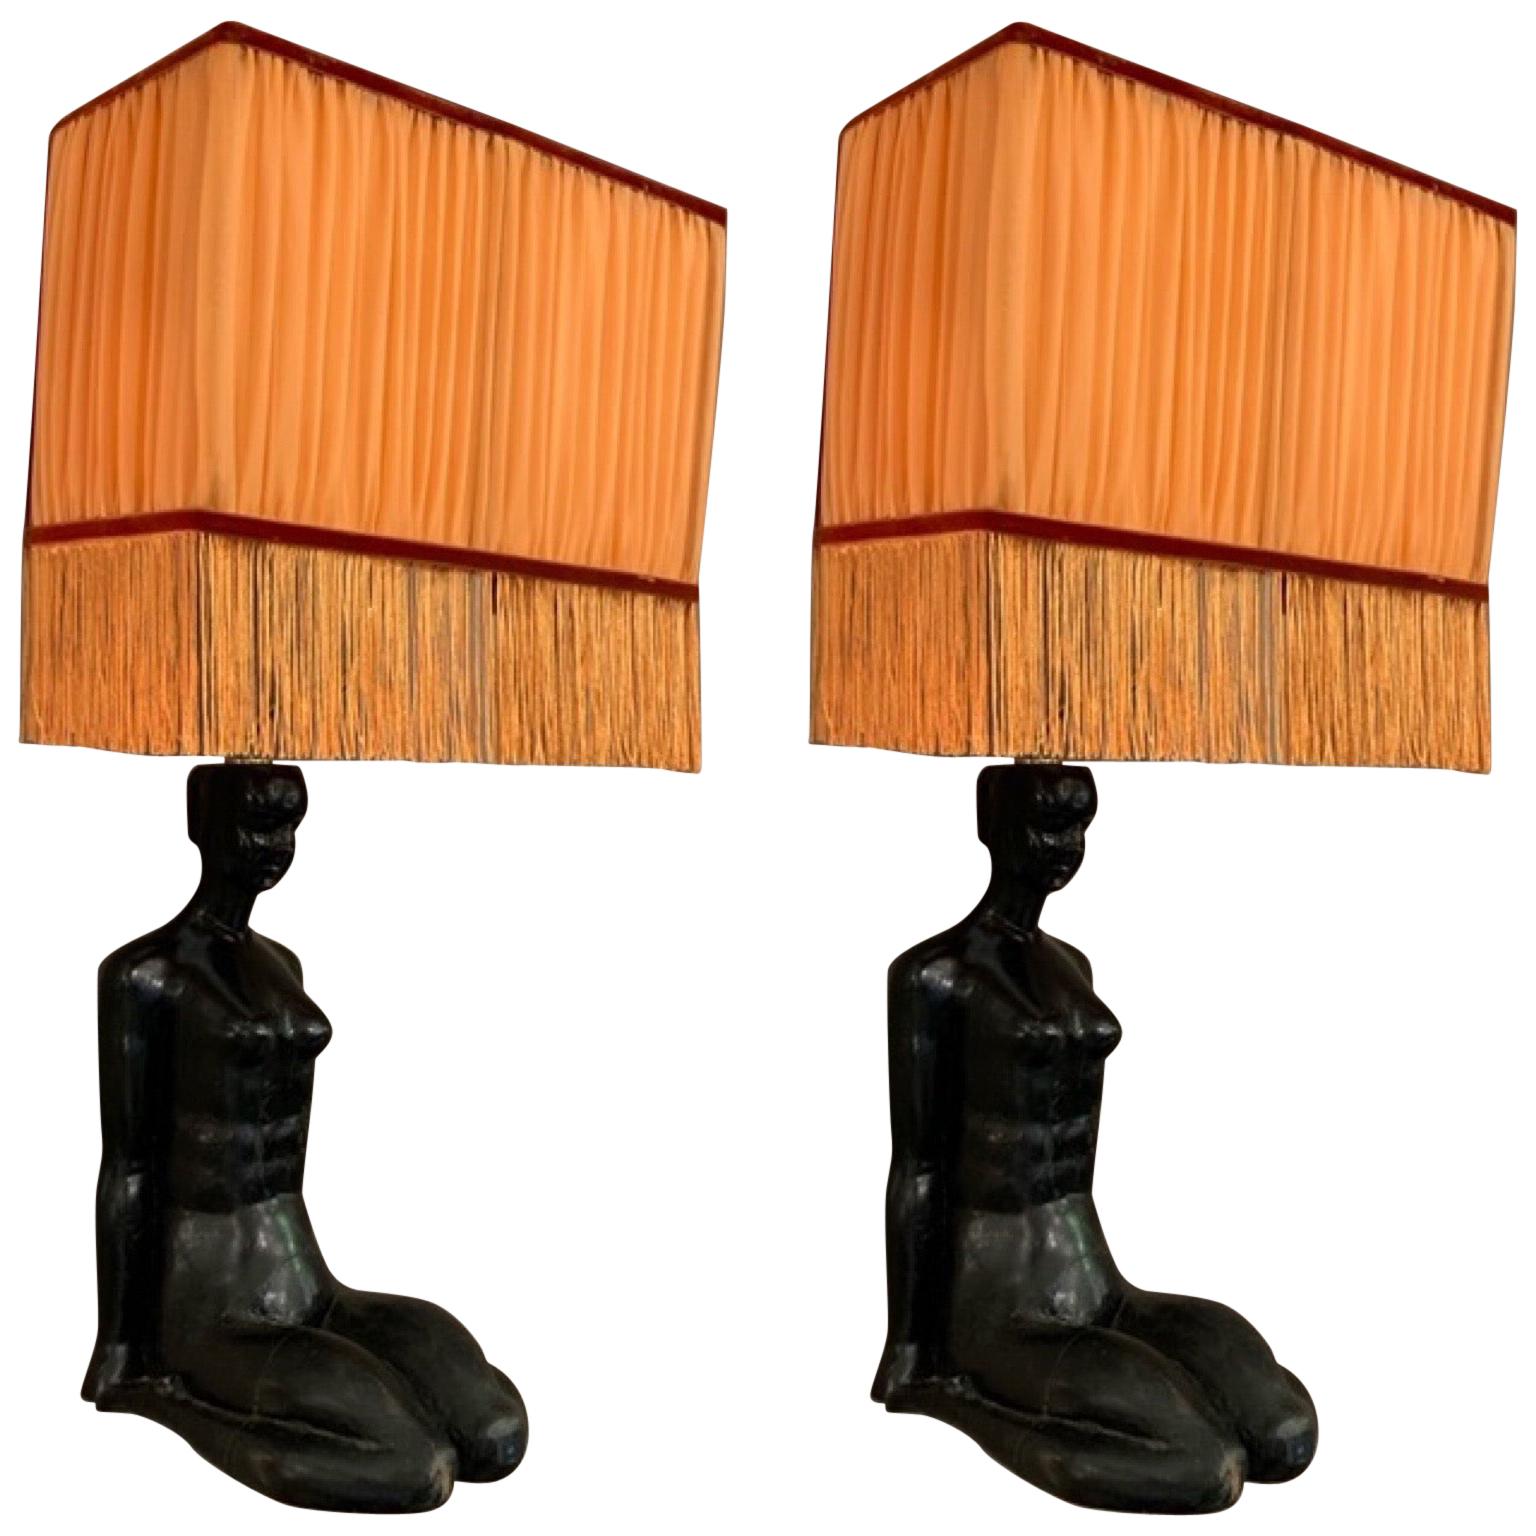 Art Deco Wood Woman Sculpture Wall Sconces Orange Lampshades with Fringe, 1940s